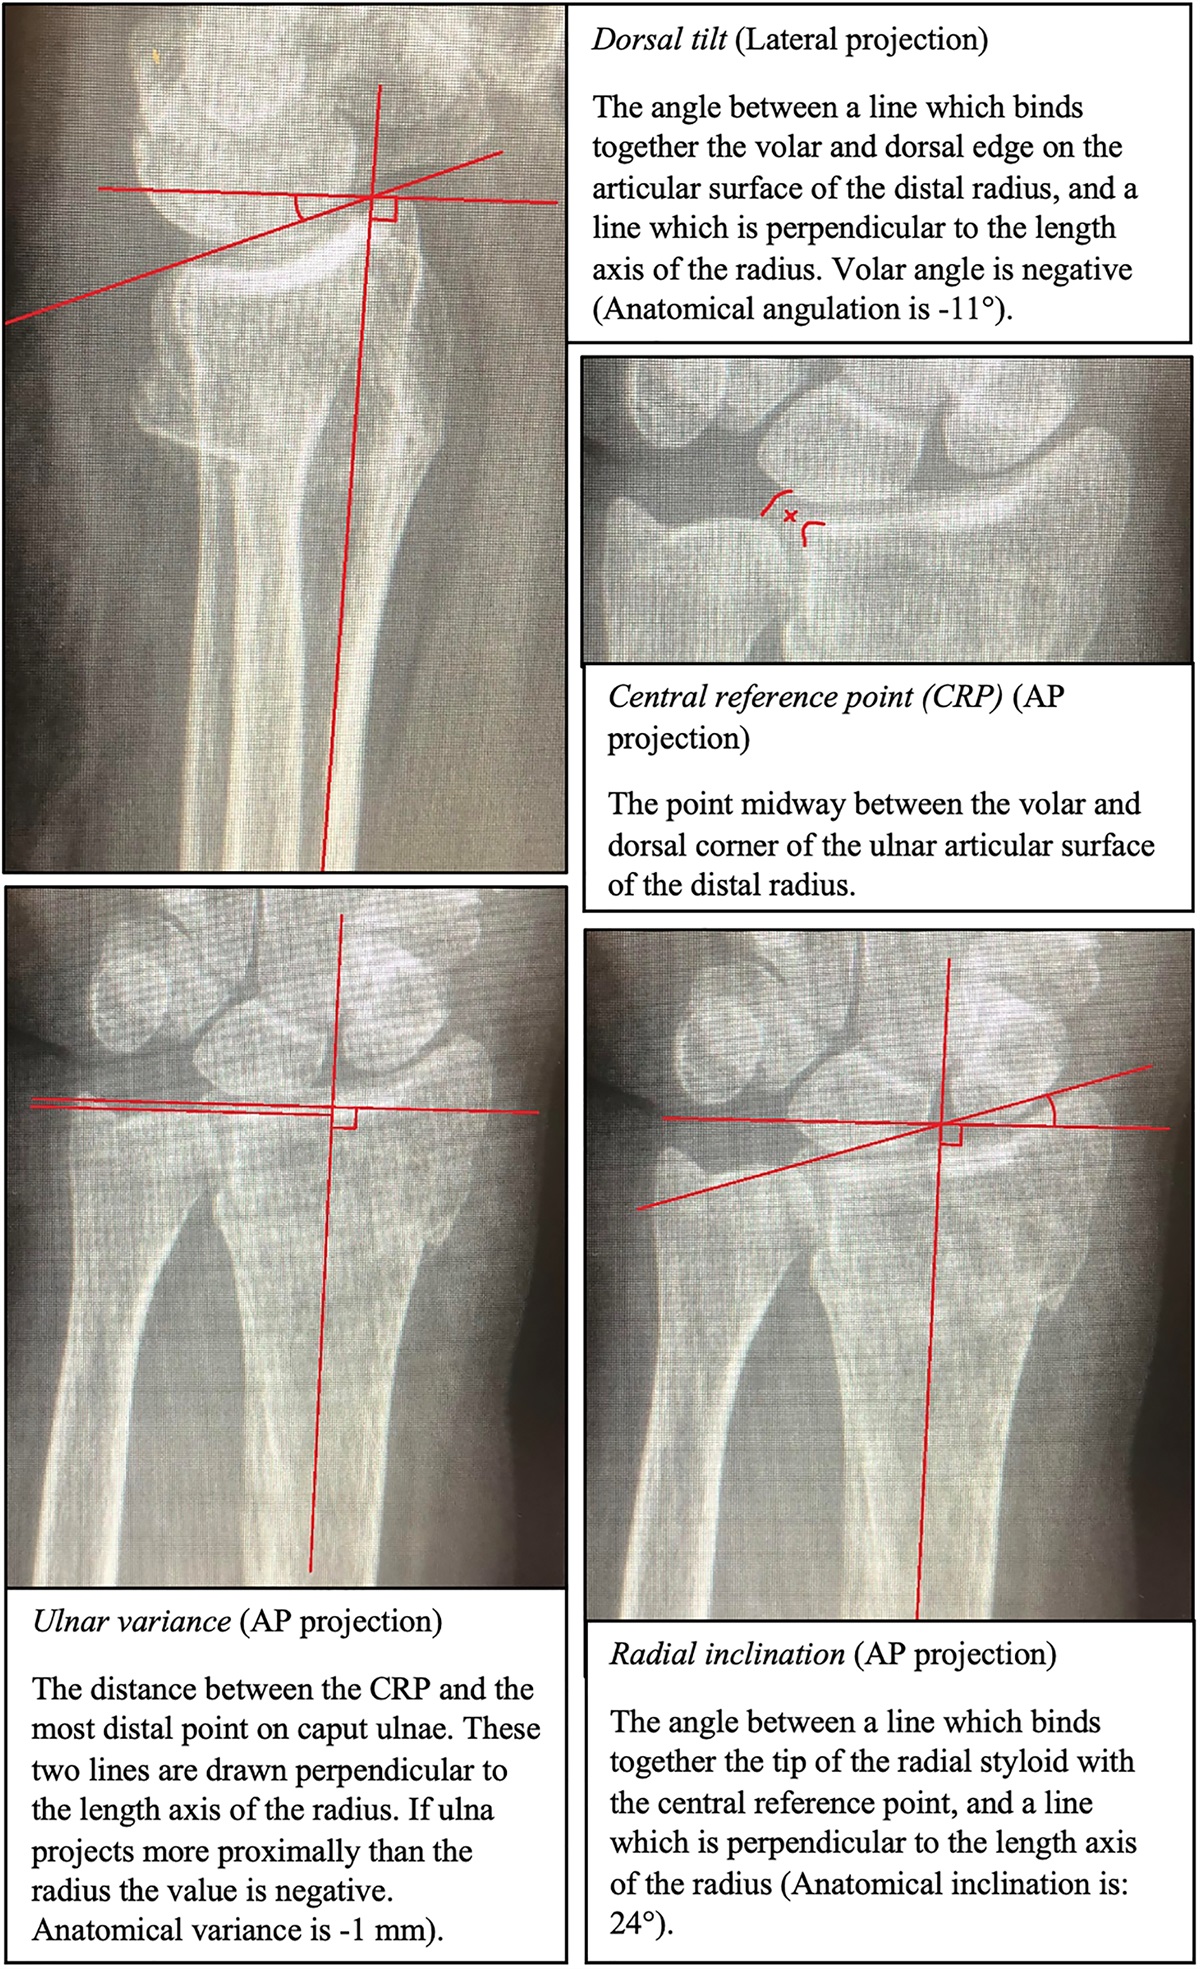 Association Between Radiographic and Clinical Outcomes Following Distal Radial Fractures: A Prospective Cohort Study with 1-Year Follow-up in 366 Patients